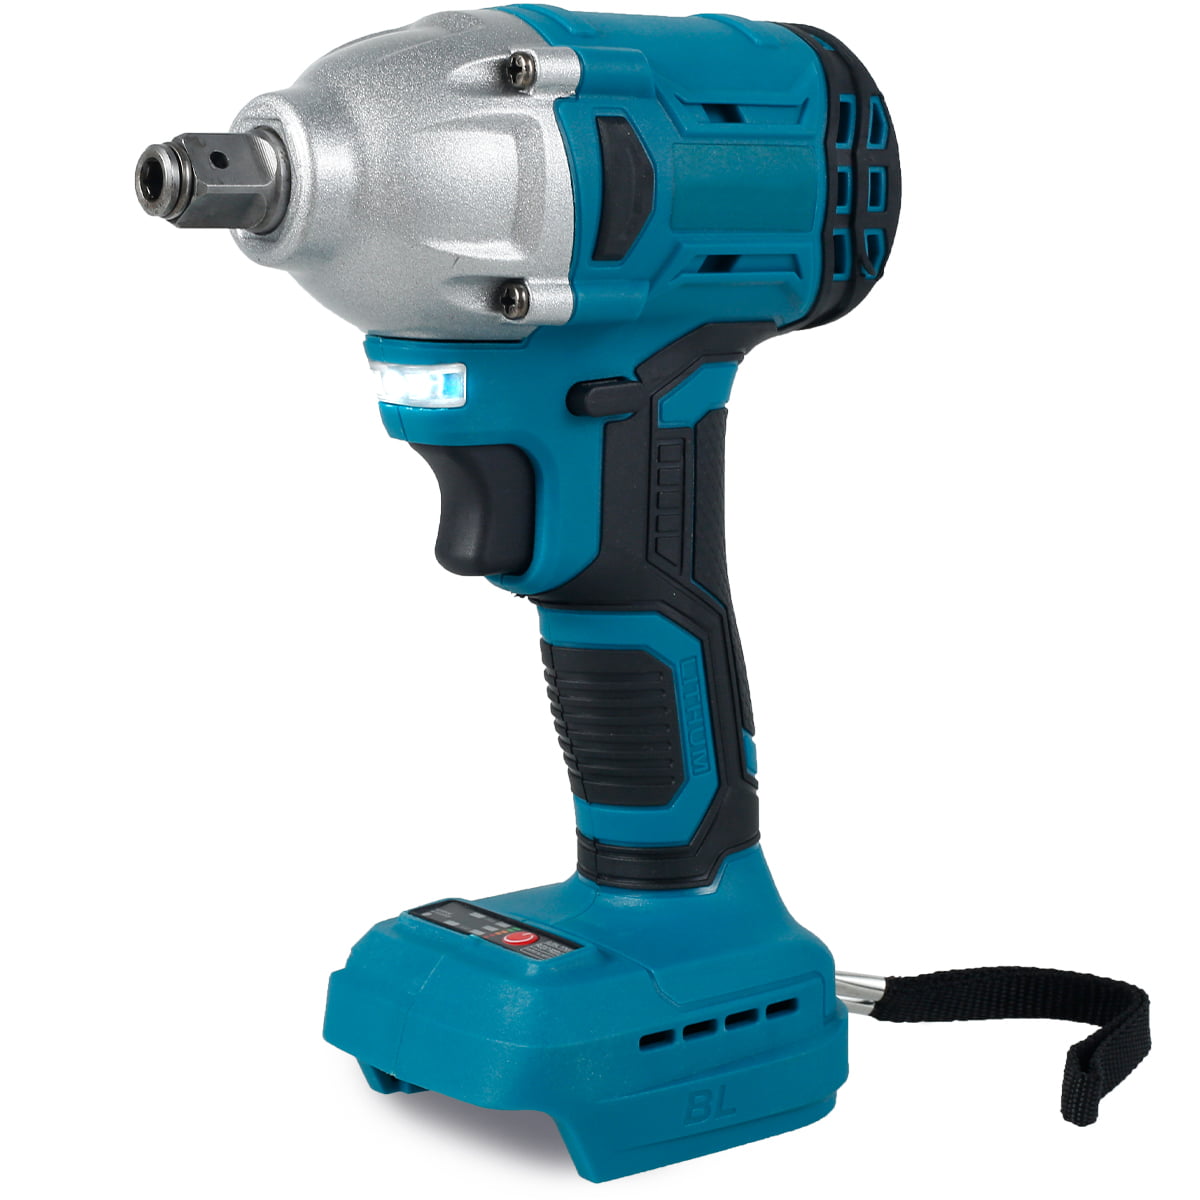 Egdank Brushless Electric Impact Cordless Impact Wrench High-Torque Impact Driver with LED Light Compatible with 18V Makita Battery Powerful Wrench Tool for Car Tire Repair Carpentry - Walmart.com